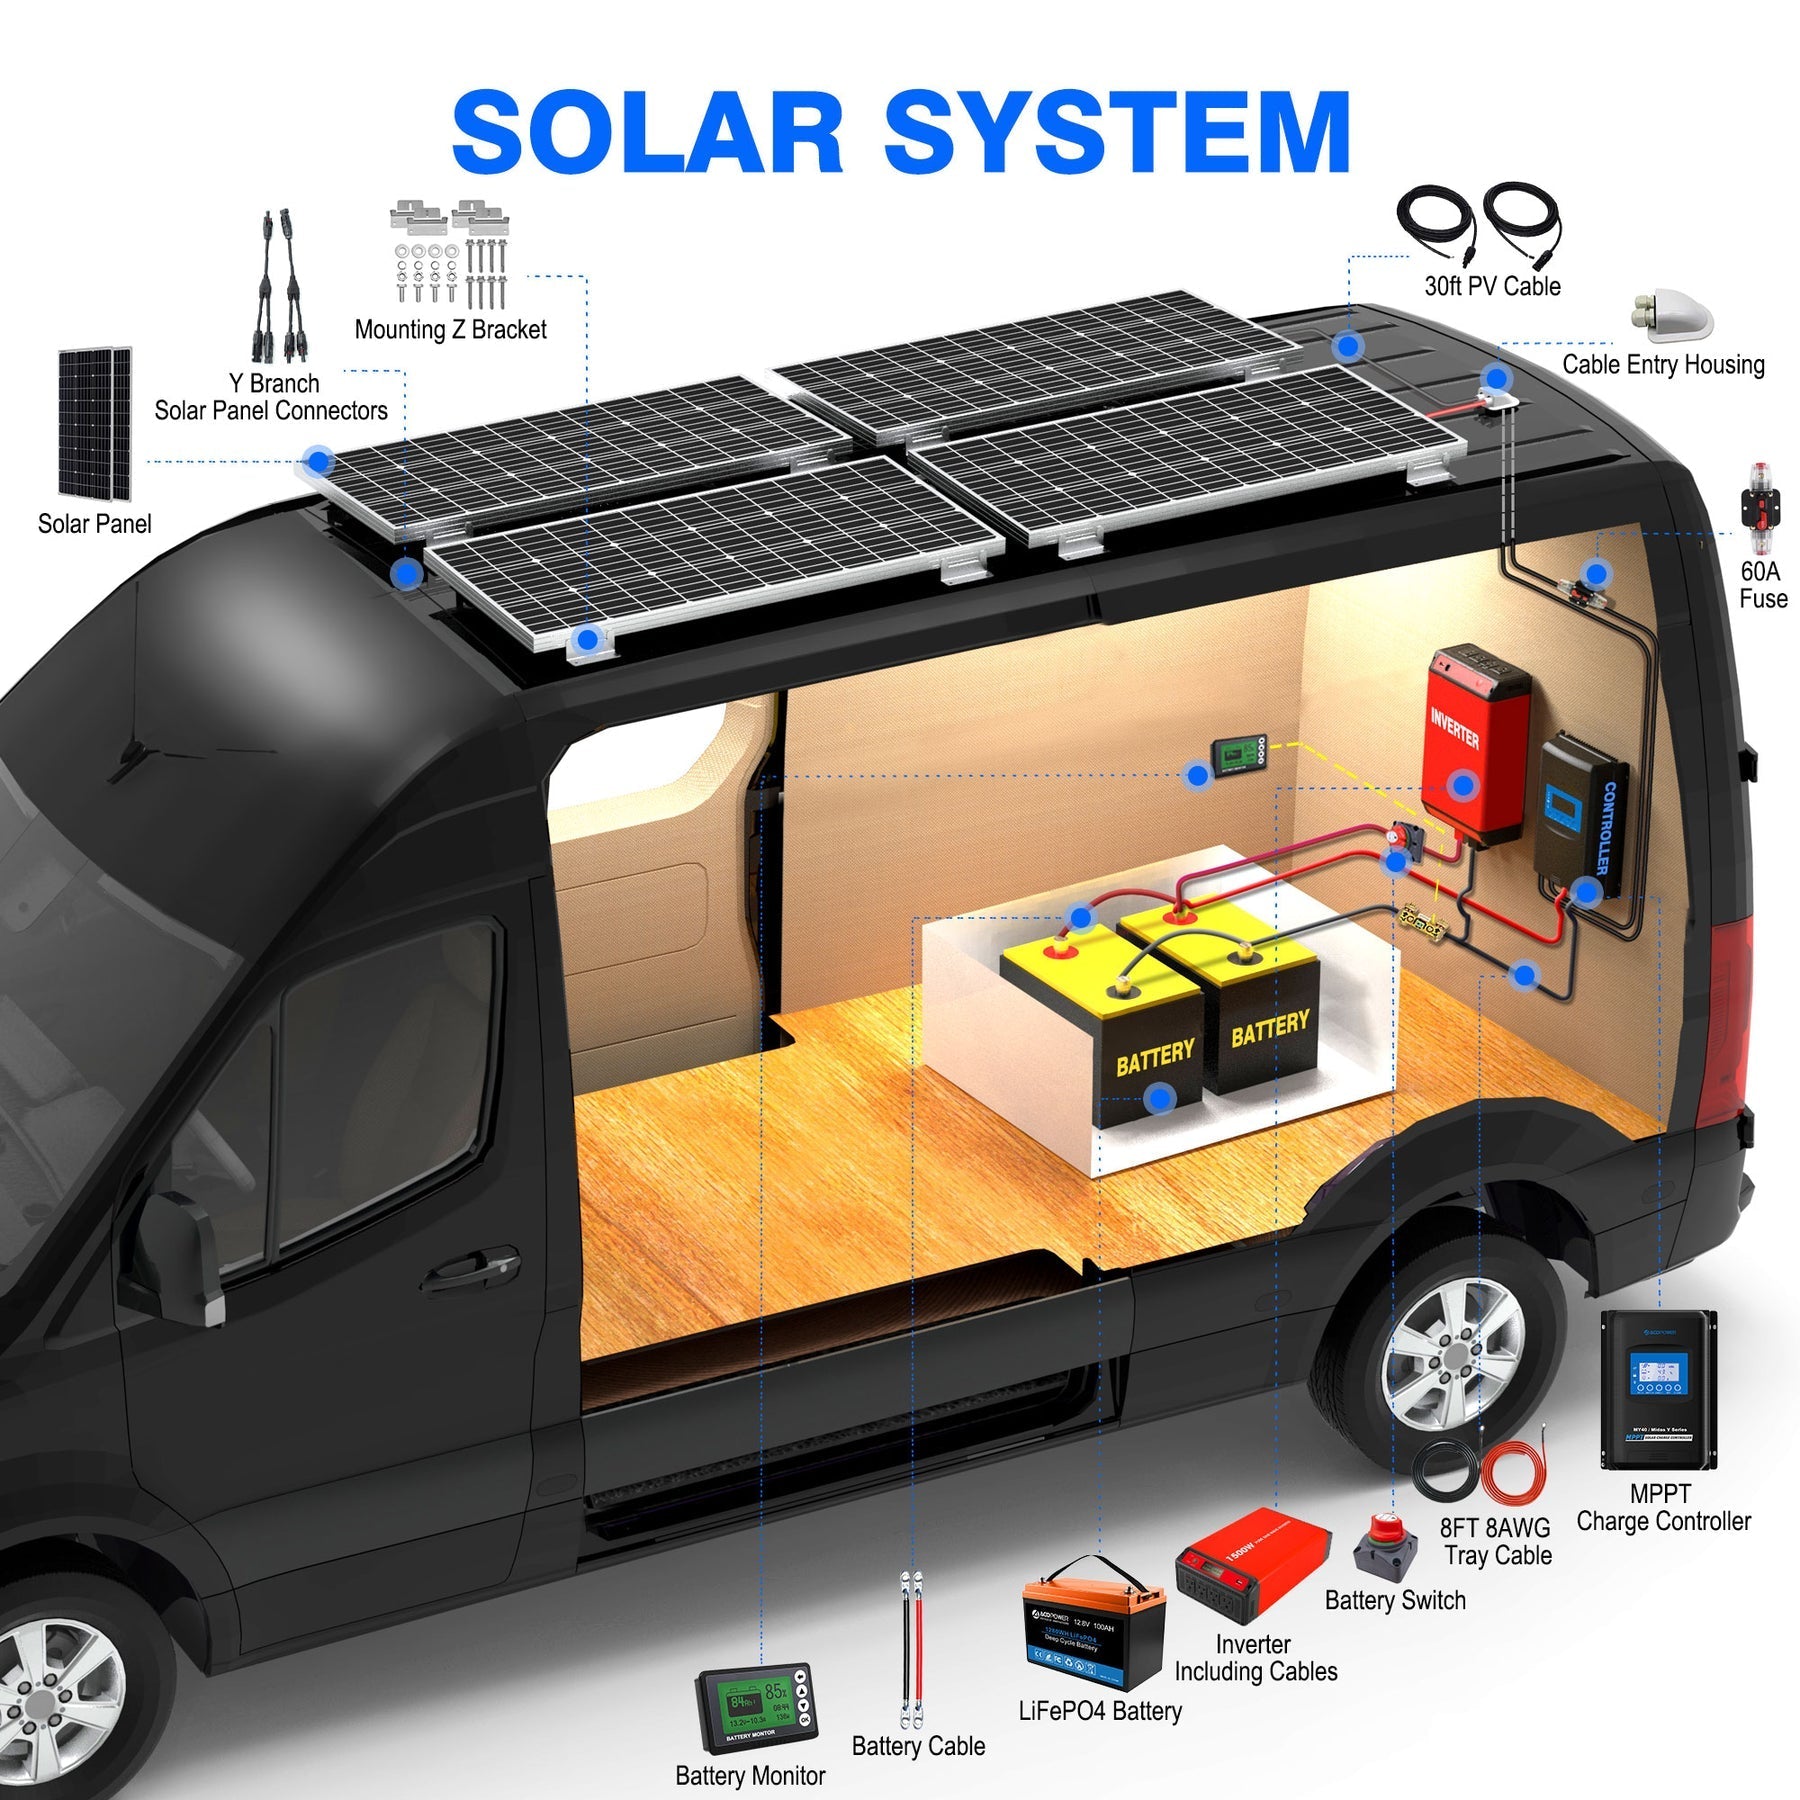 ACOPOWER Lithium Battery Polycrystalline Solar Power Complete System